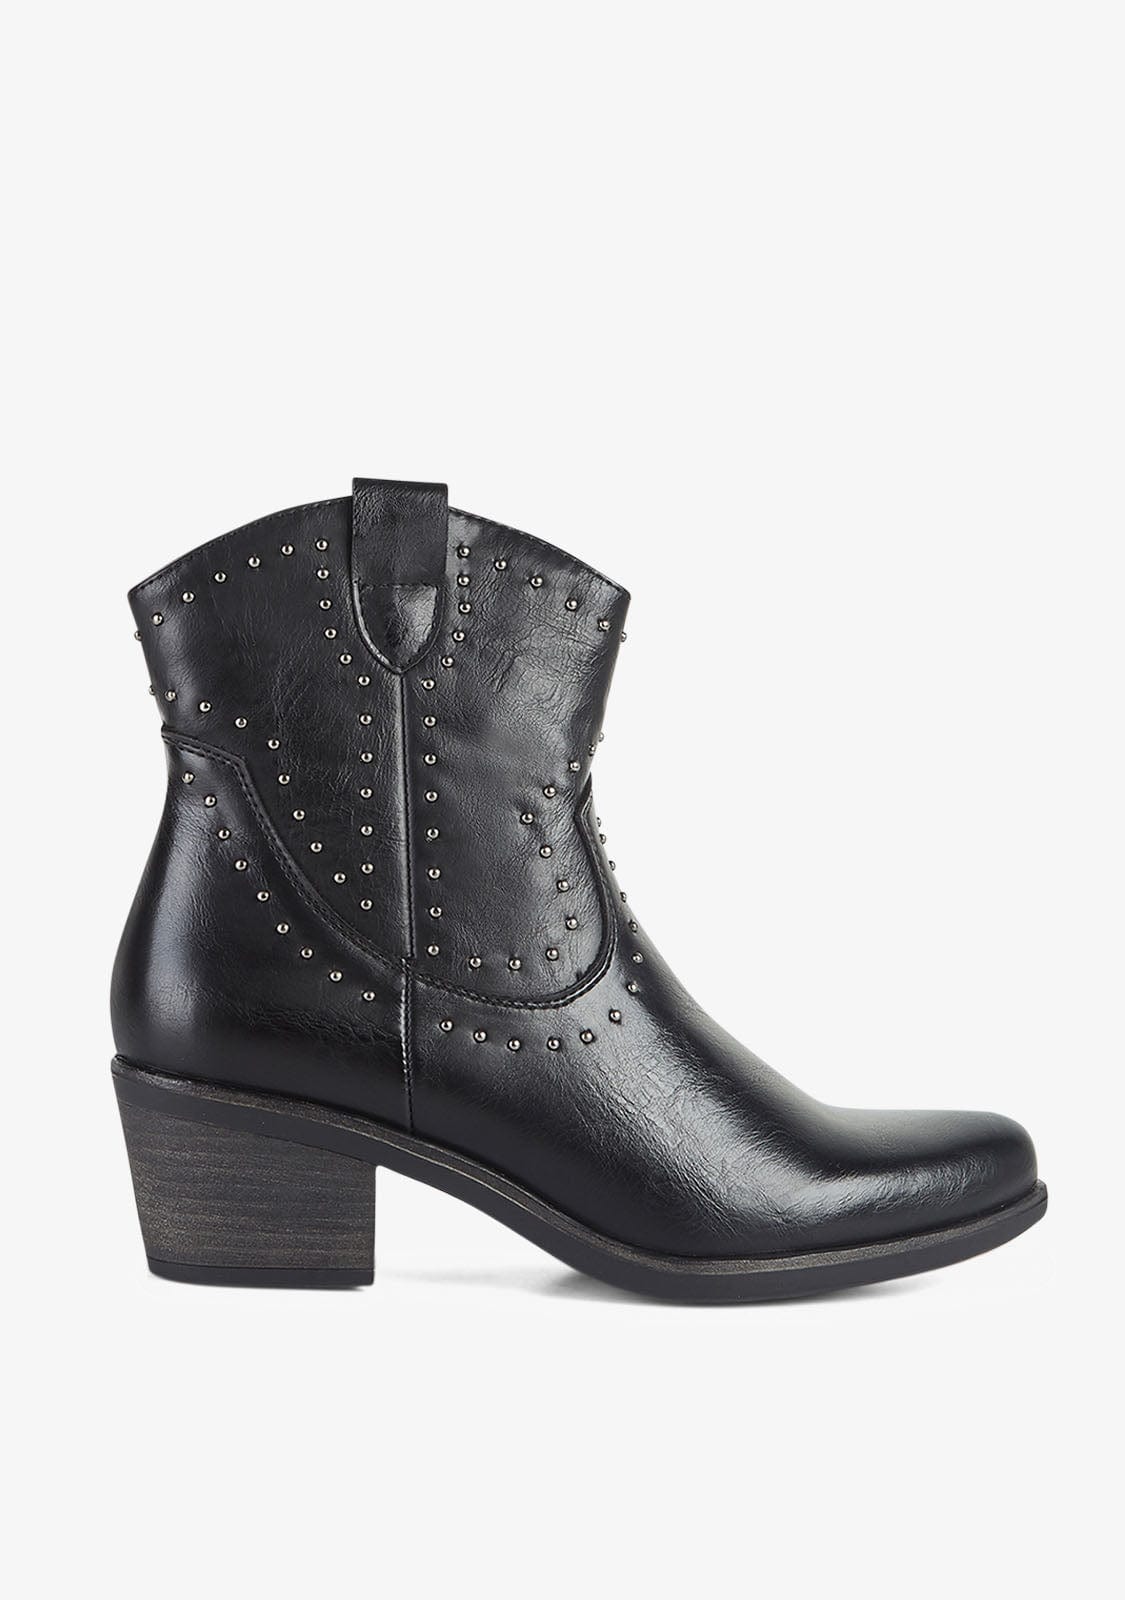 Ankle Boots Cowboy West Black Nappa